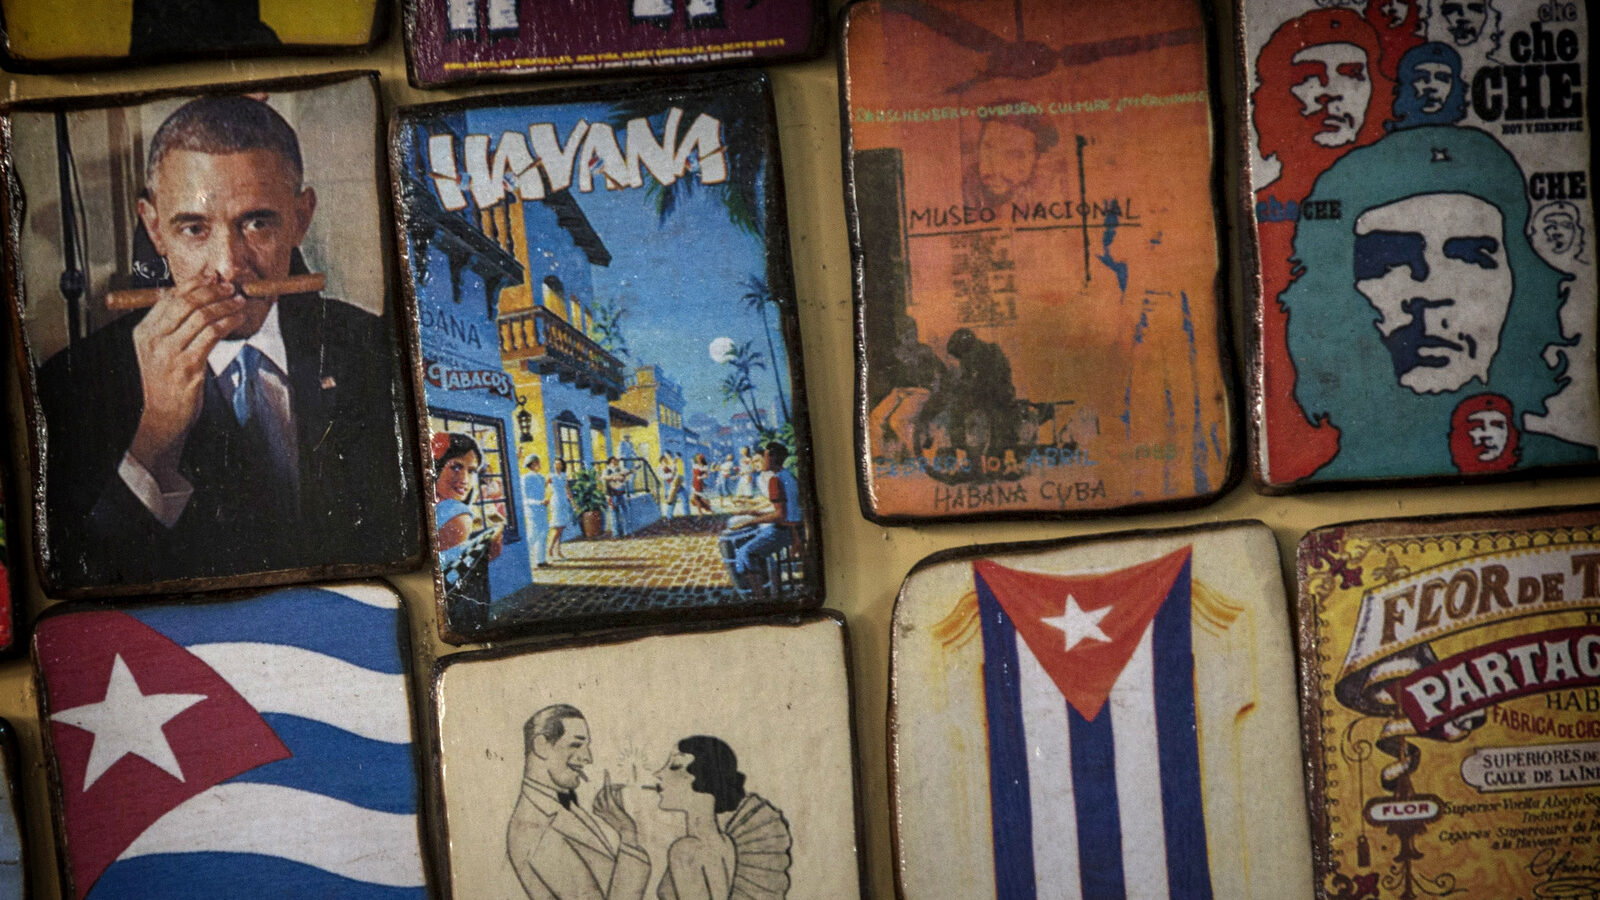 Magnets for sale decorate a tourist shop, one showing an image of U.S. President Barack Obama smelling a cigar, at a market in Havana, Cuba, Monday, March 16, 2015. (AP/Ramon Espinosa)